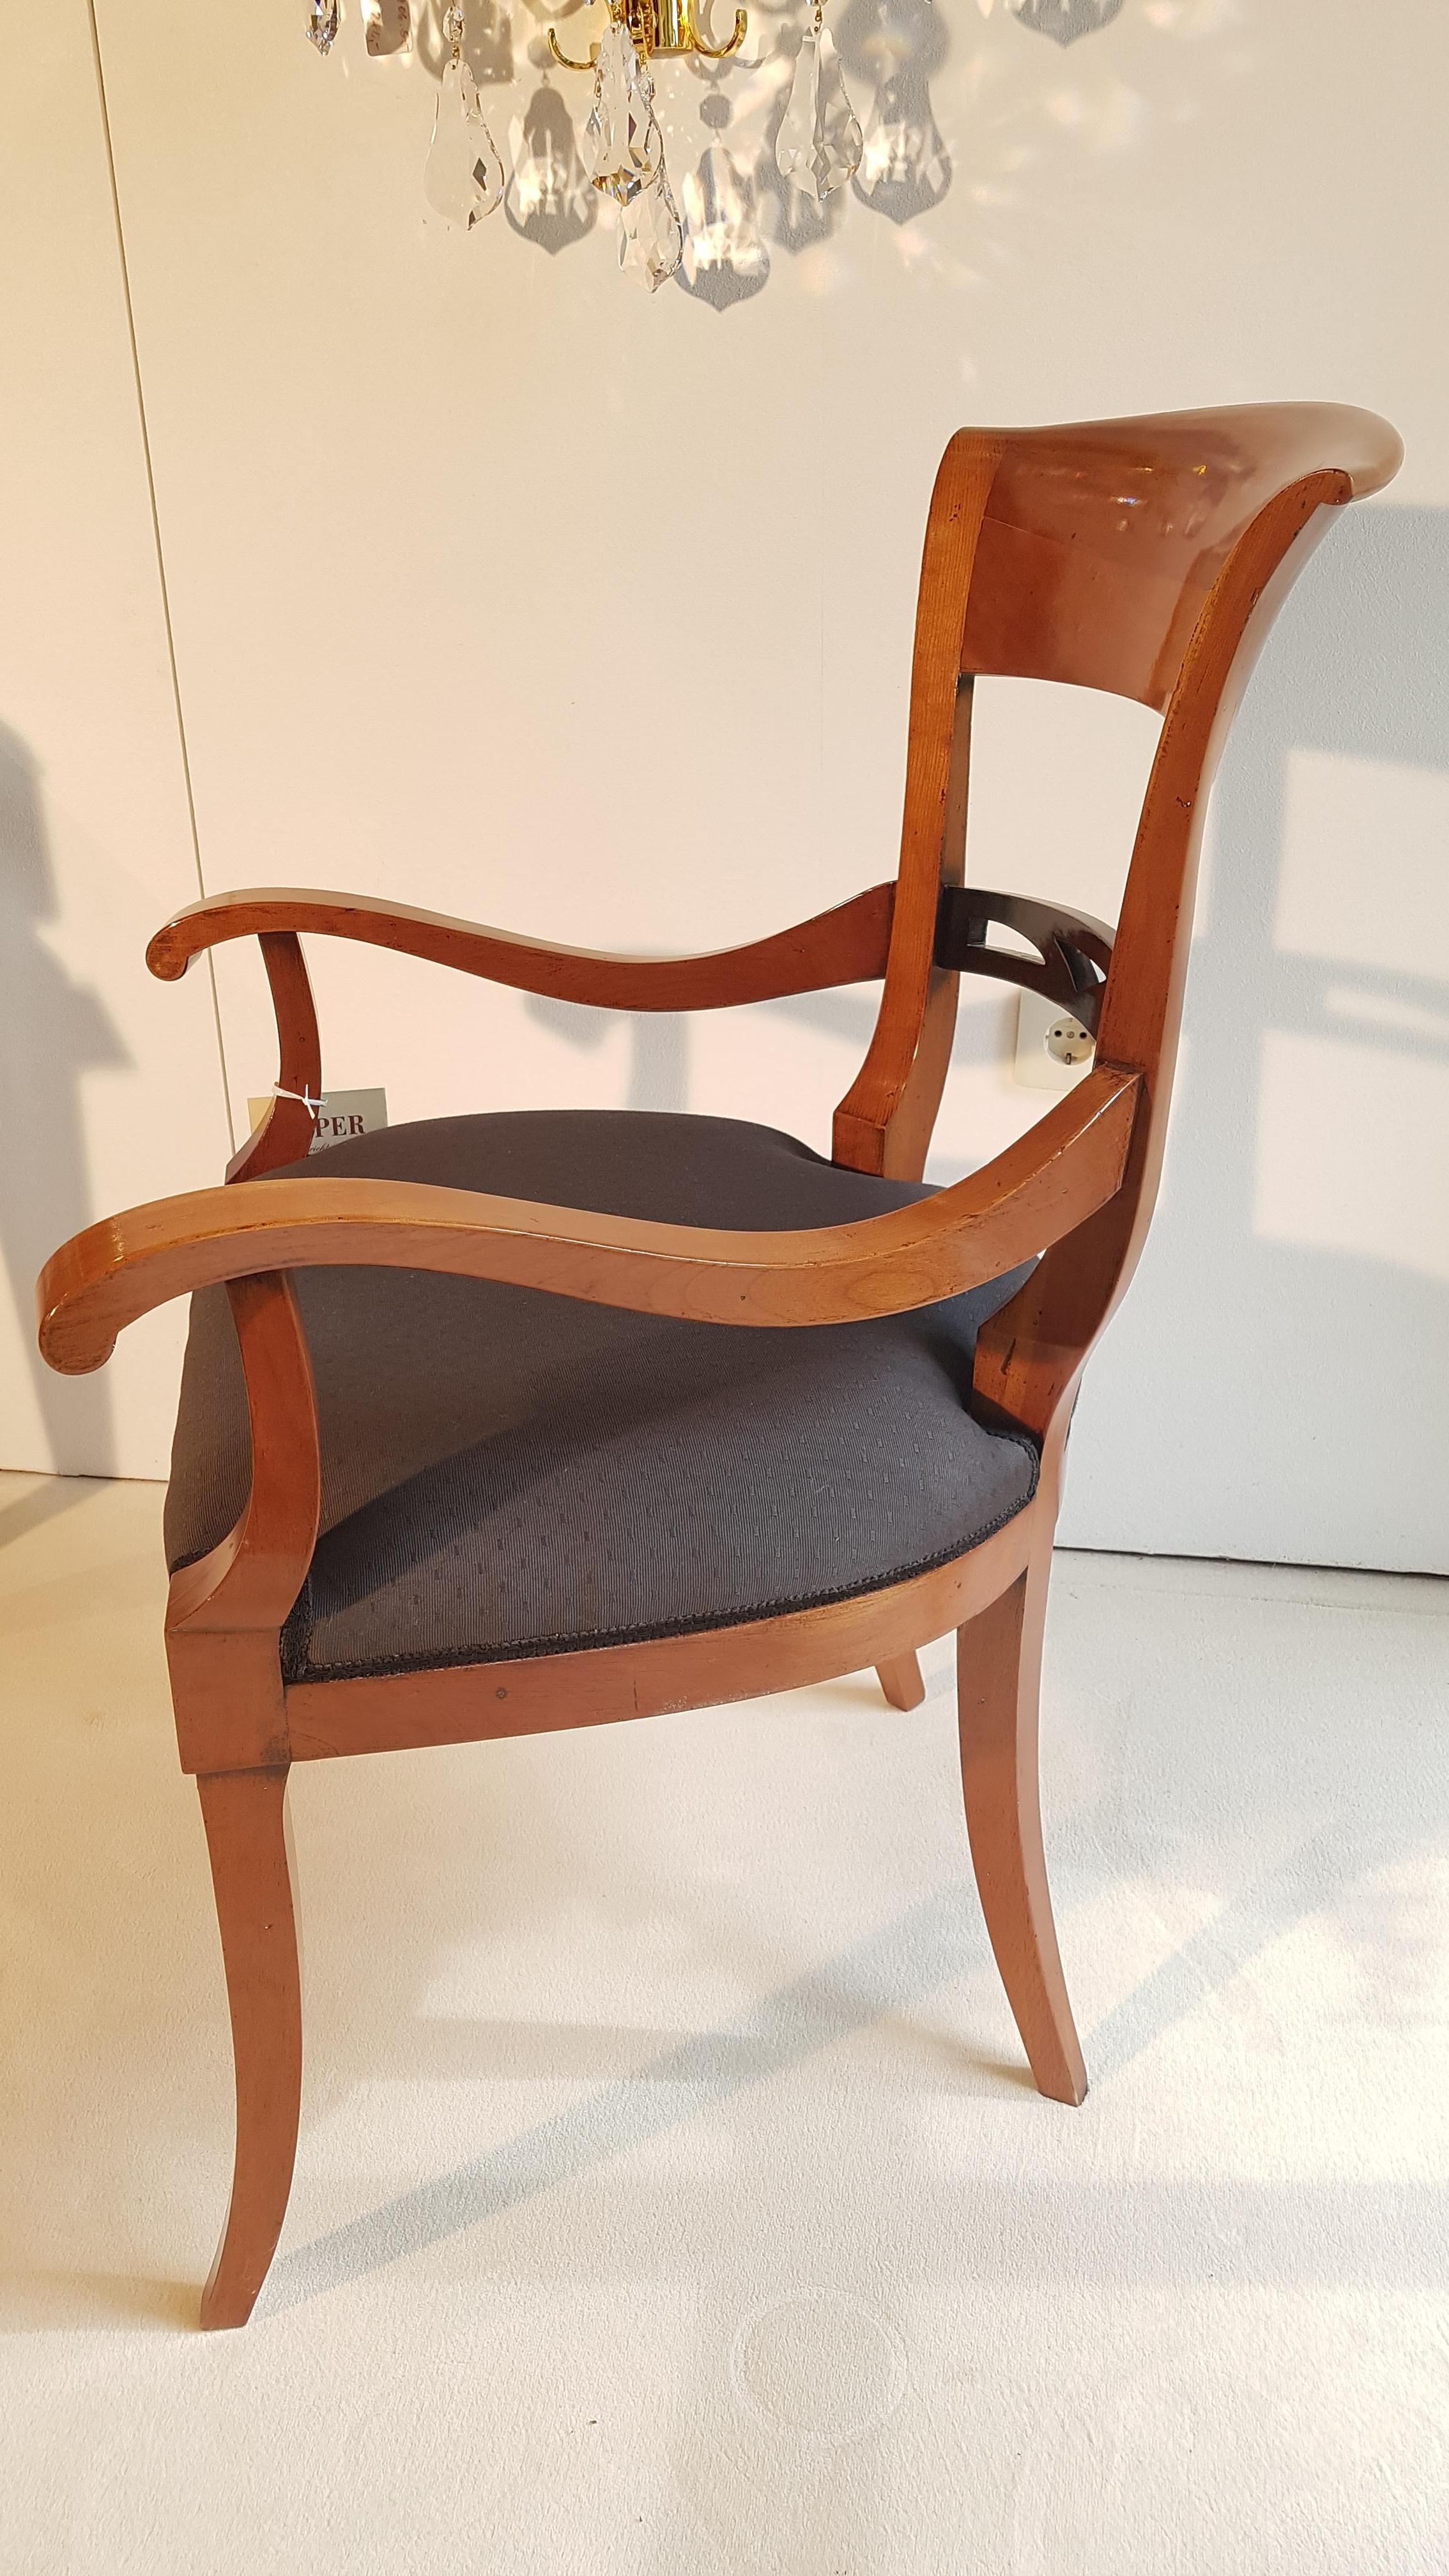 Beautiful petite armchair made of cherry wood with a high gloss polished finish. Convinces with its elegant Biedermeier design and the wonderful hue of the cherrywood. Features curved armrests and feet and a newly upholstered seating area with a